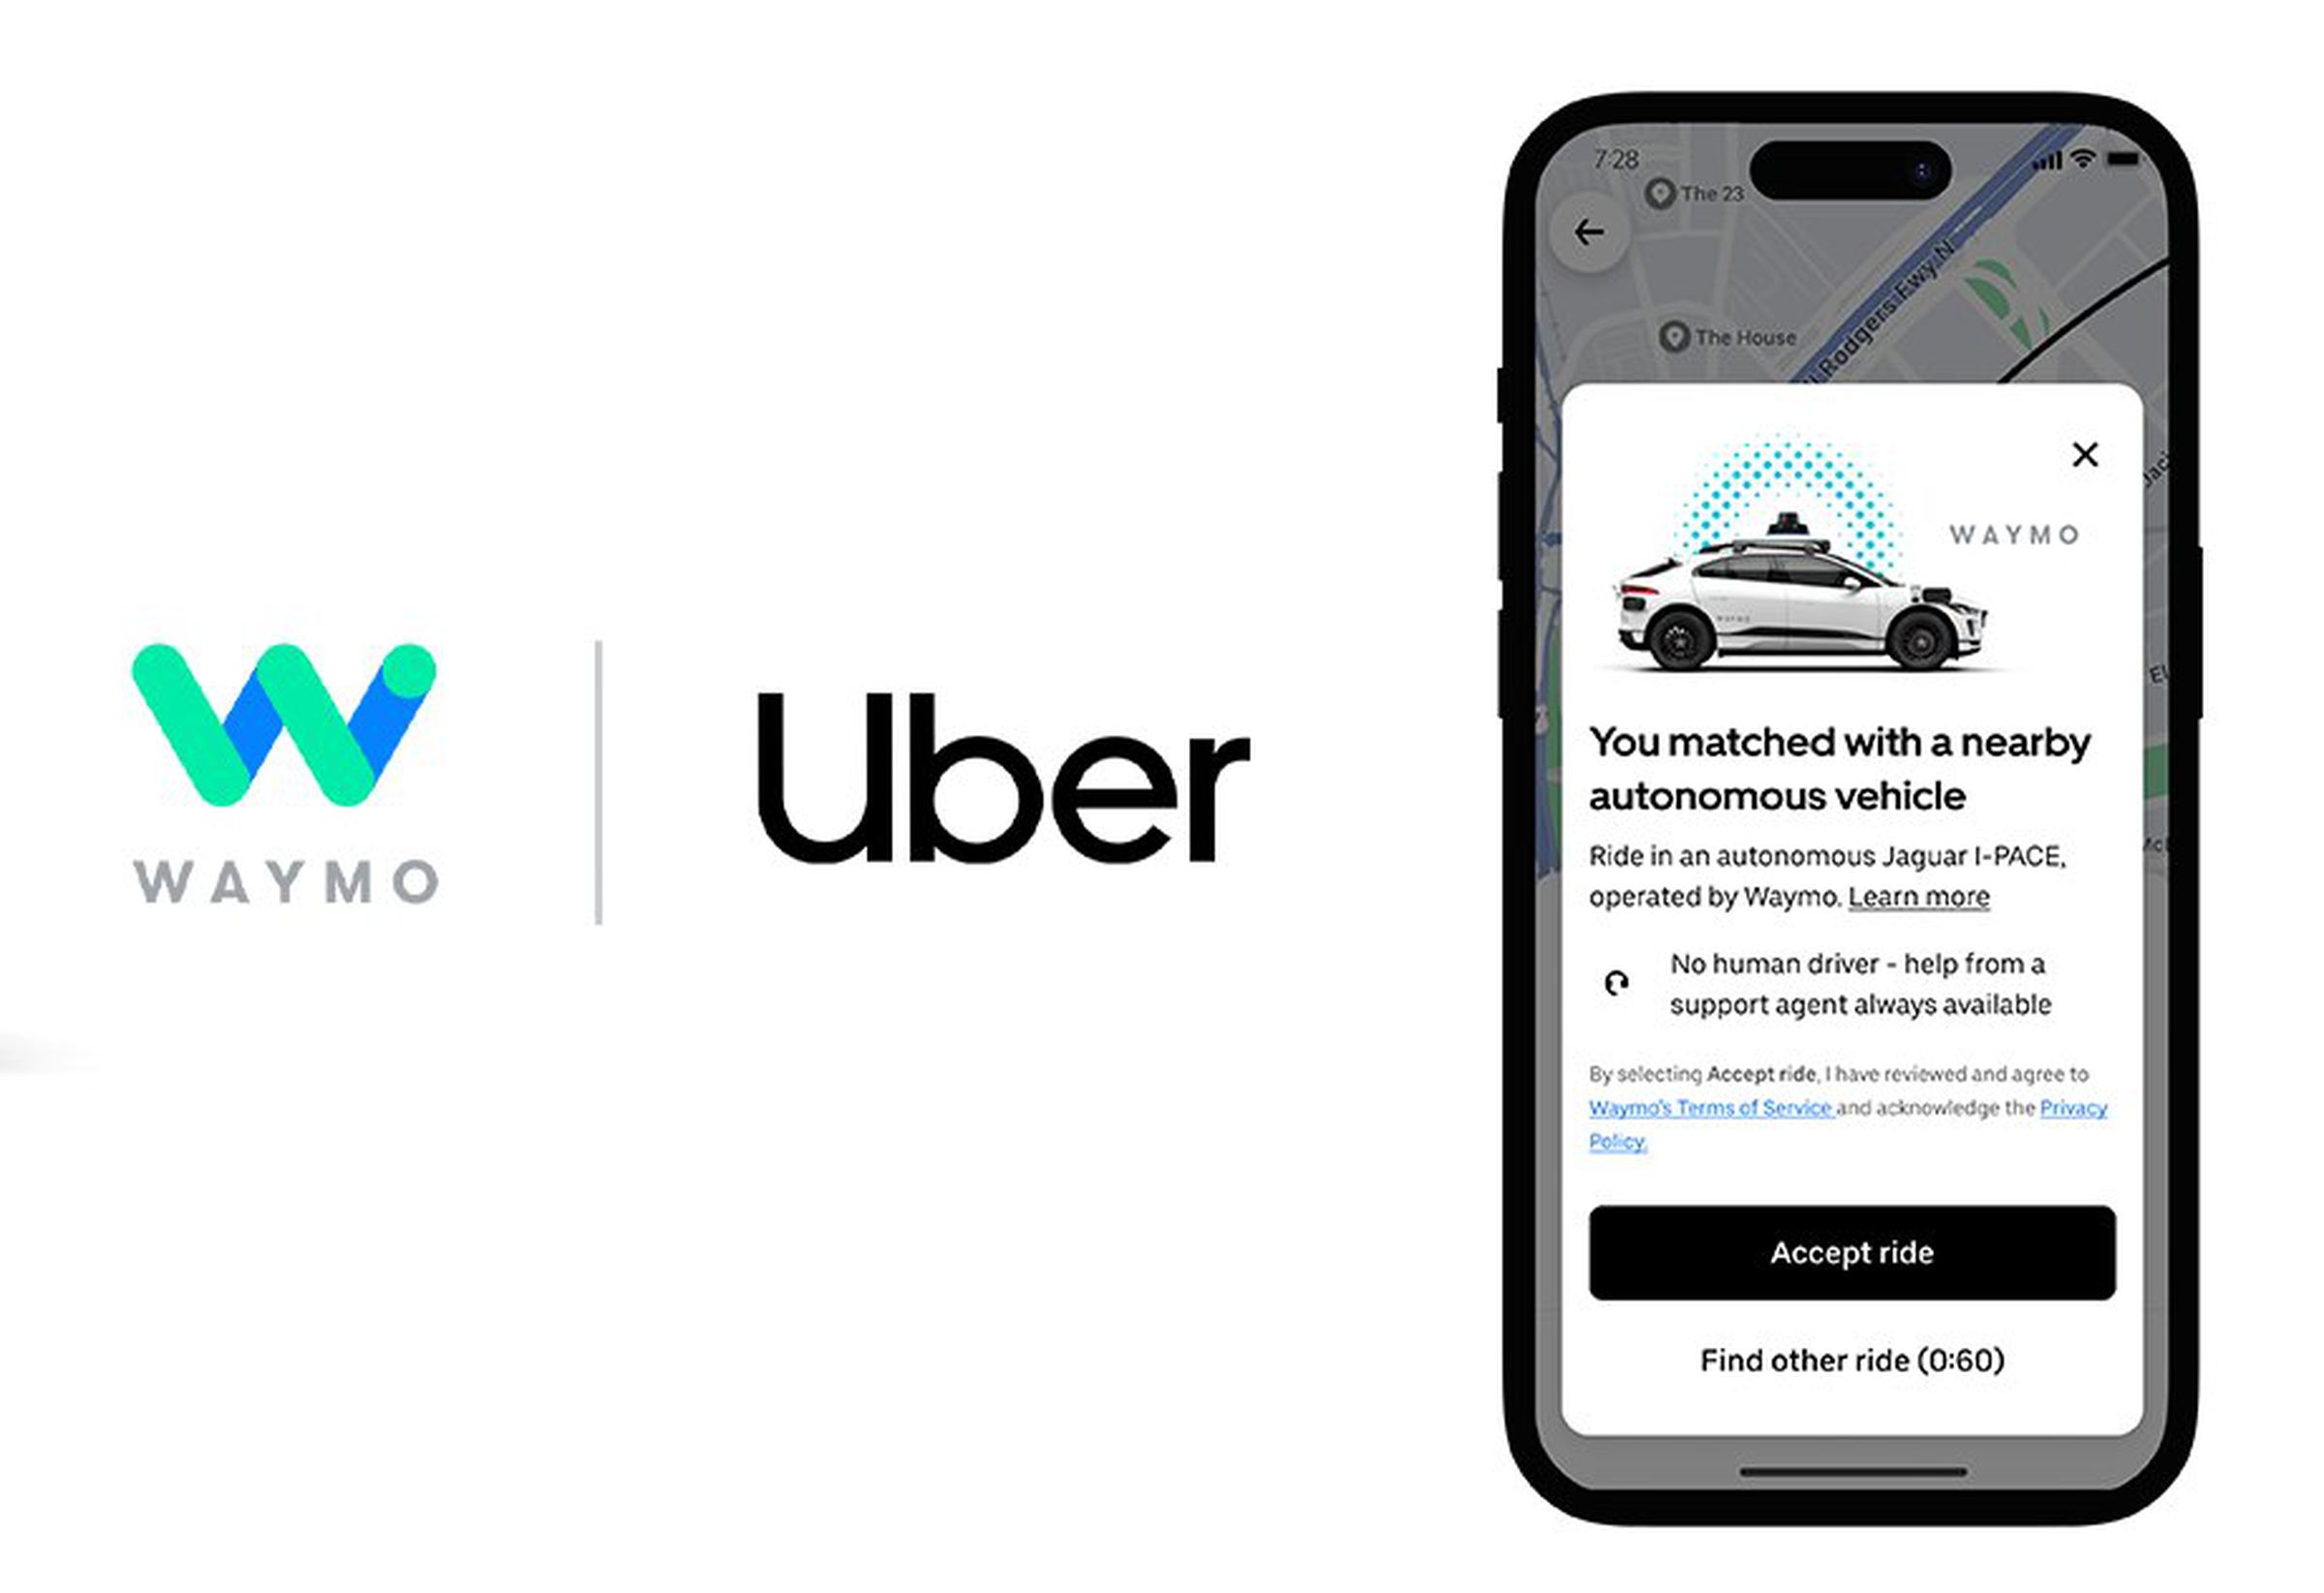 Screenshot of the Uber app on an iPhone prompting a rider to accept a ride with a Waymo-operated autonomous vehicle.